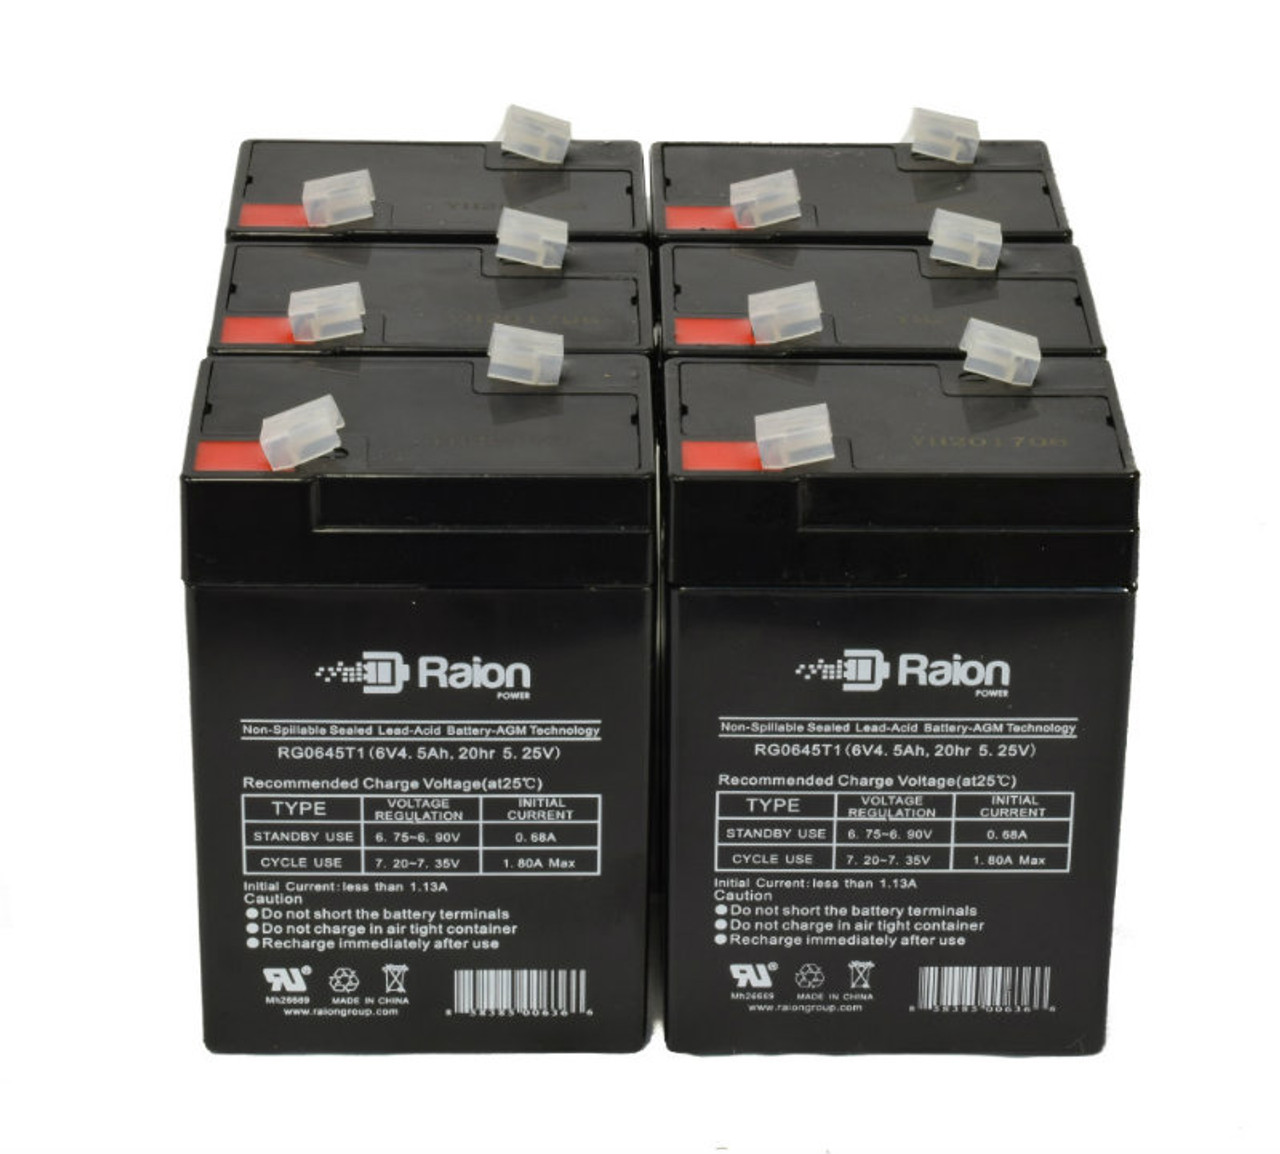 Raion Power 6 Volt 4.5Ah RG0645T1 Replacement Battery for Leader CT4.5-6 - 6 Pack